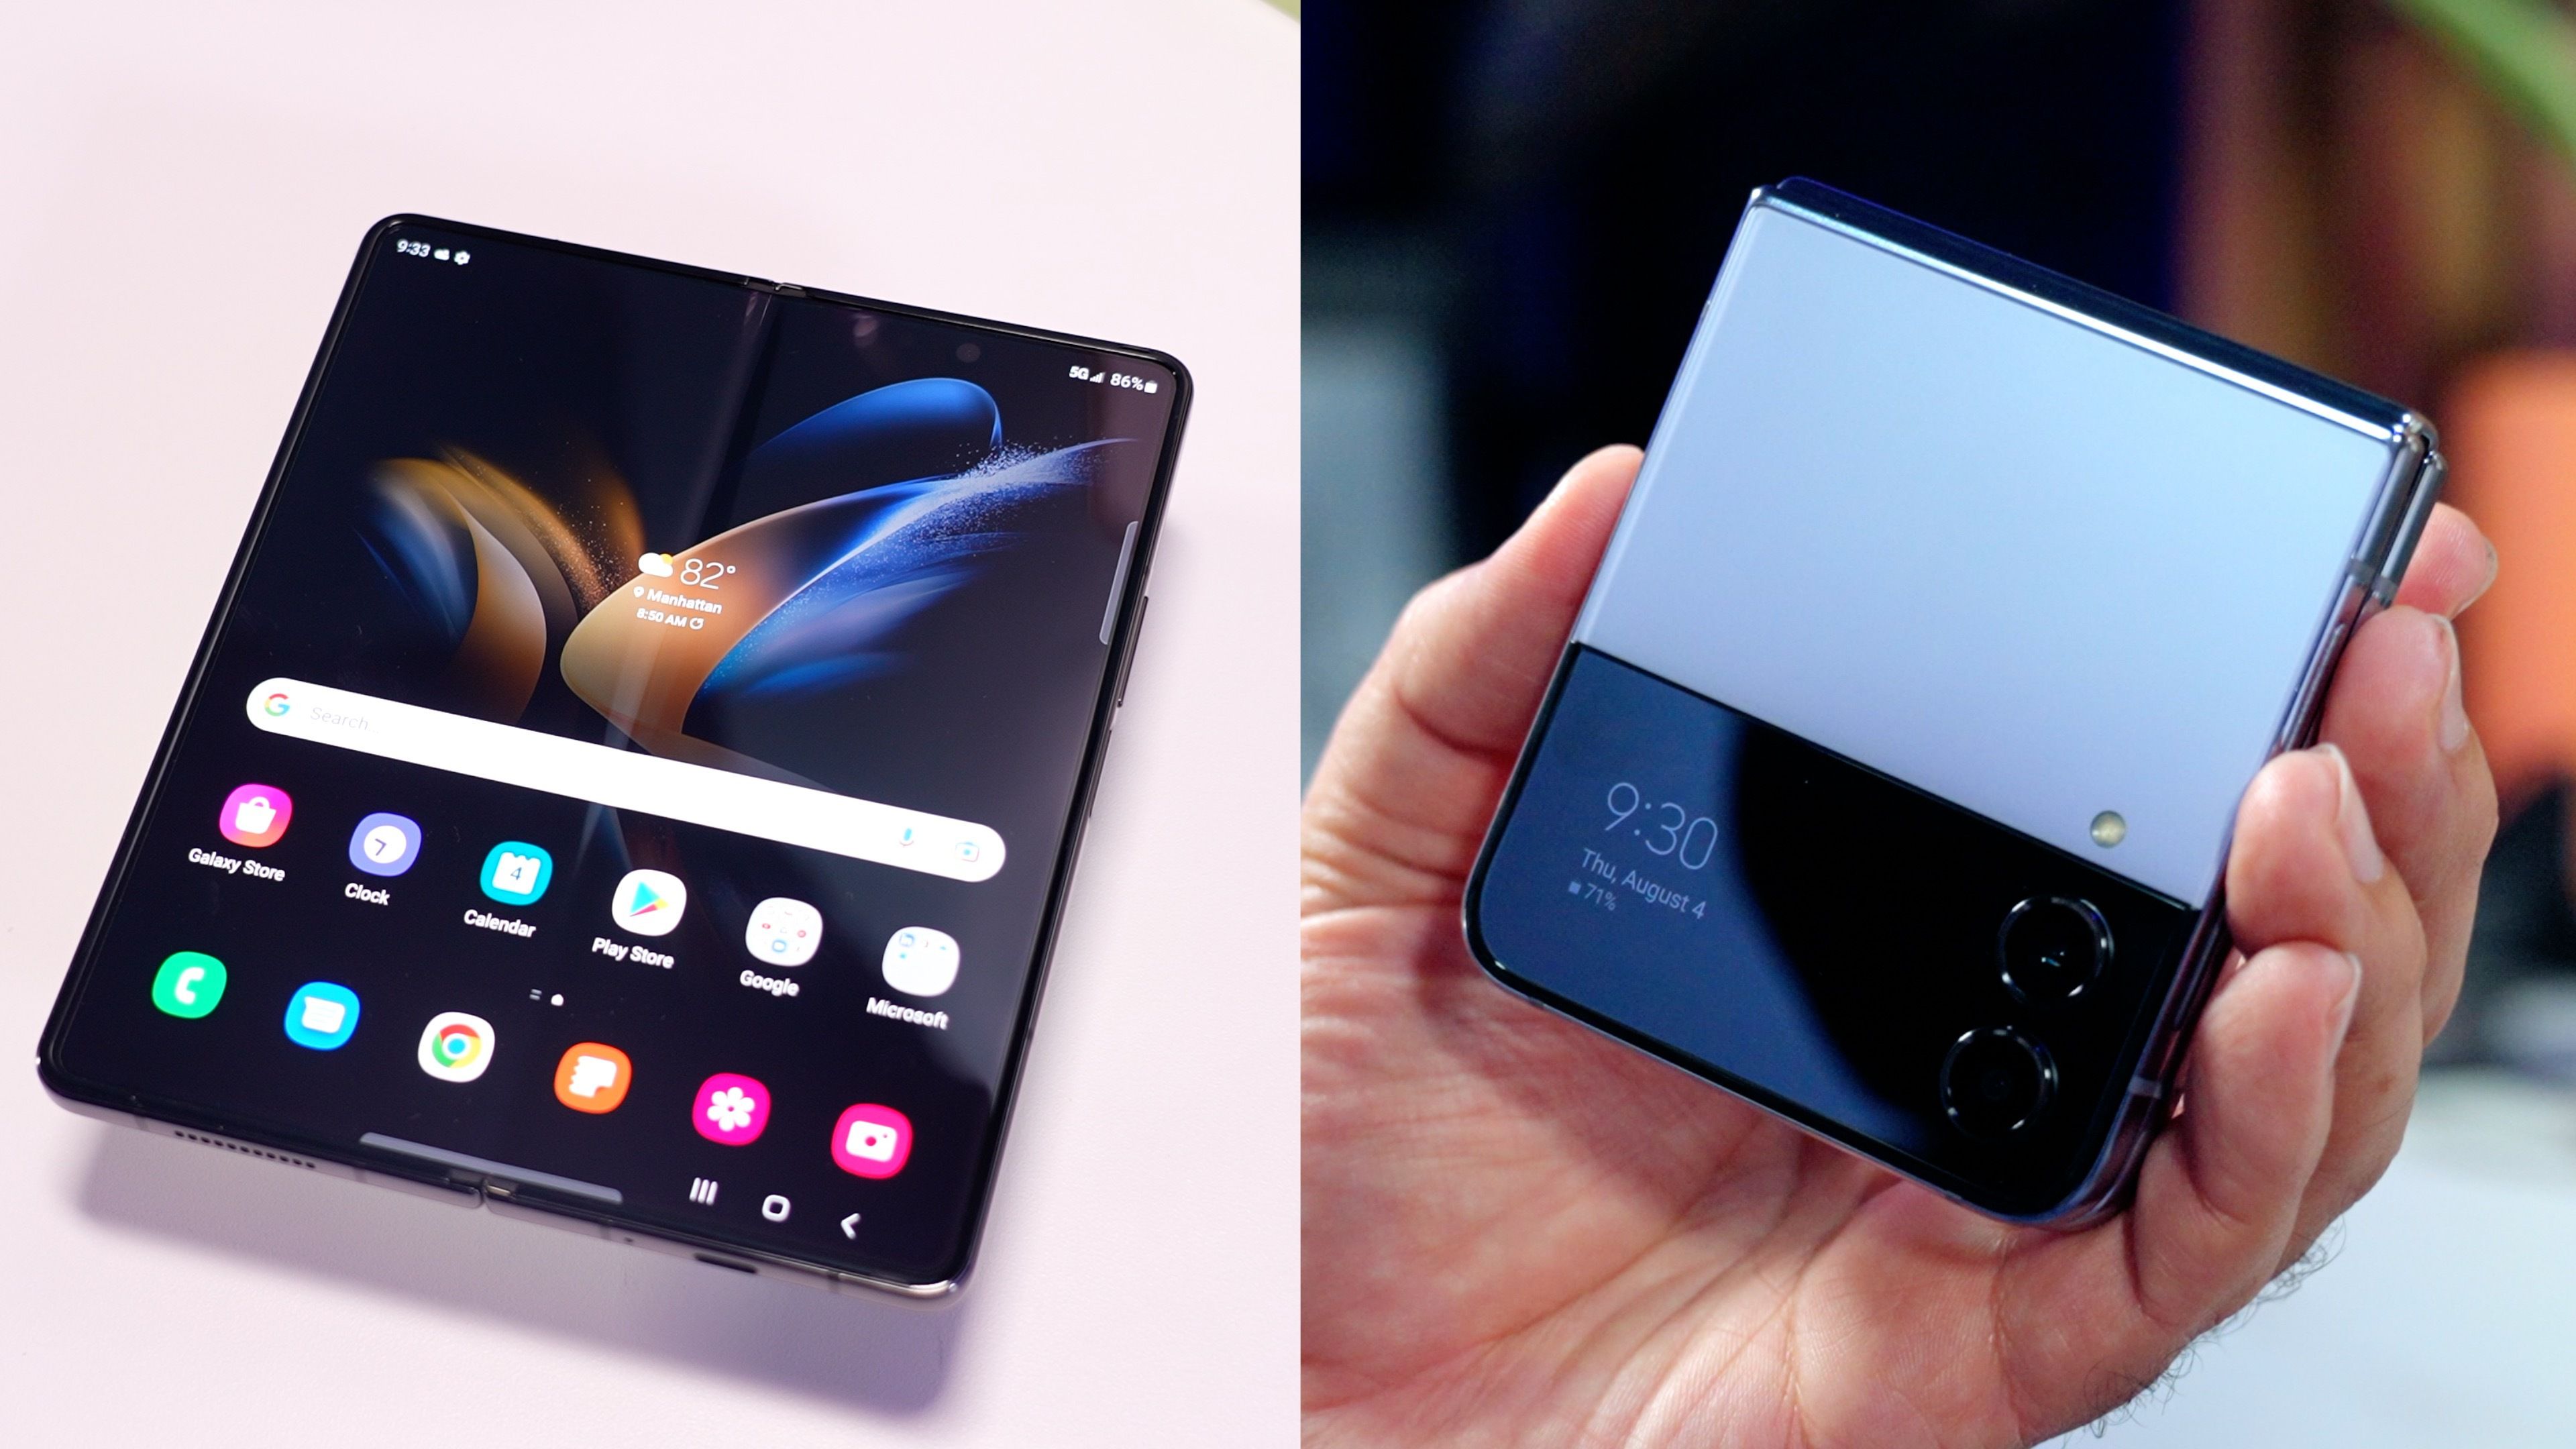 Hands-On With Samsung's Latest Foldable Smartphones, the Galaxy Z Fold and Z Flip